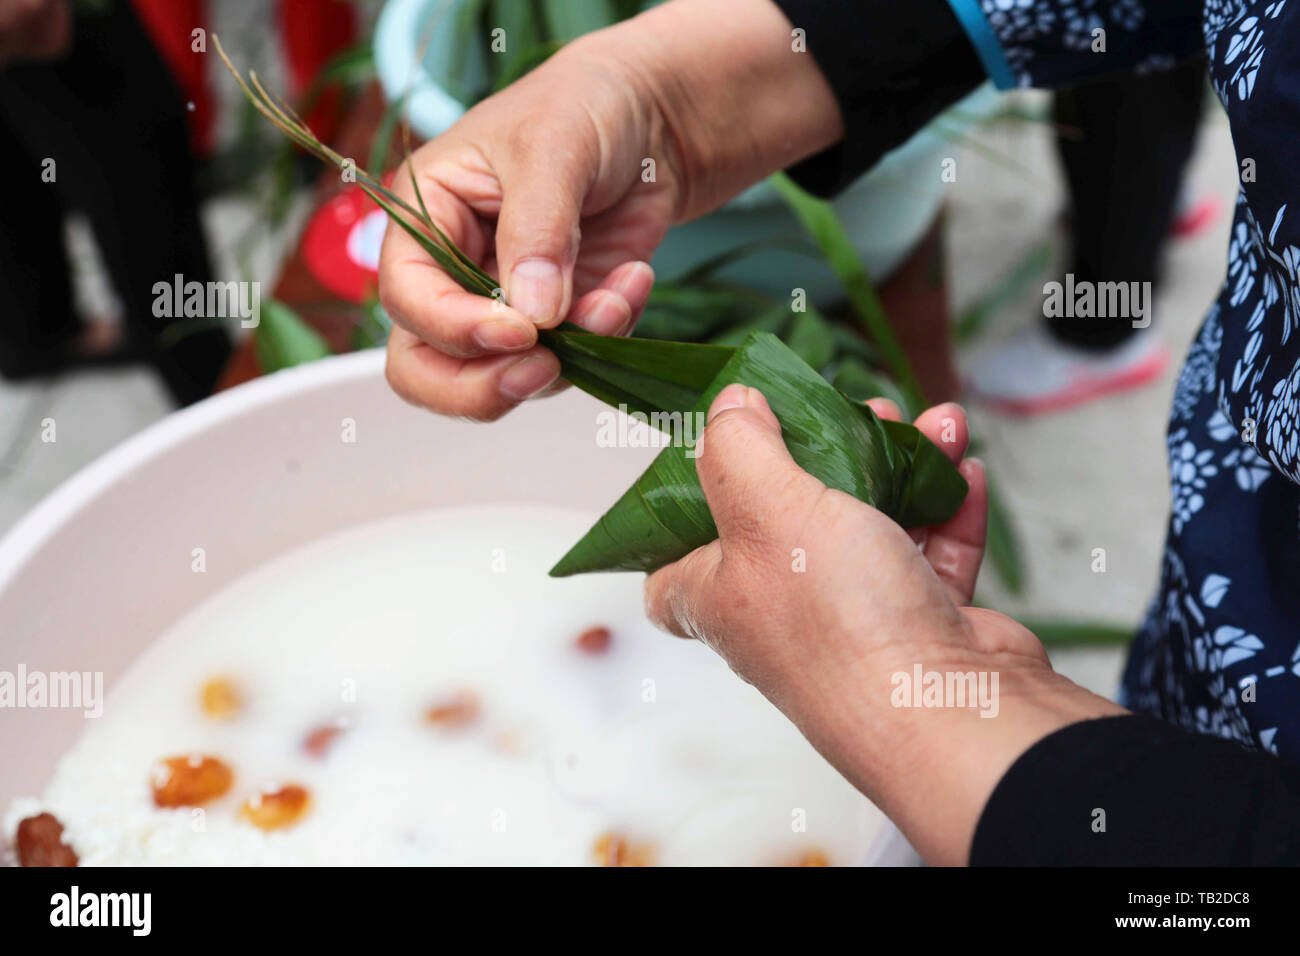 Lianyungang, China's Jiangsu Province. 30th May, 2019. A woman makes Zongzi, a kind of rice dumpling wrapped up with bamboo leaves, during a contest in Lianyungang City, east China's Jiangsu Province, May 30, 2019. Credit: Zhu Huanan/Xinhua/Alamy Live News Stock Photo